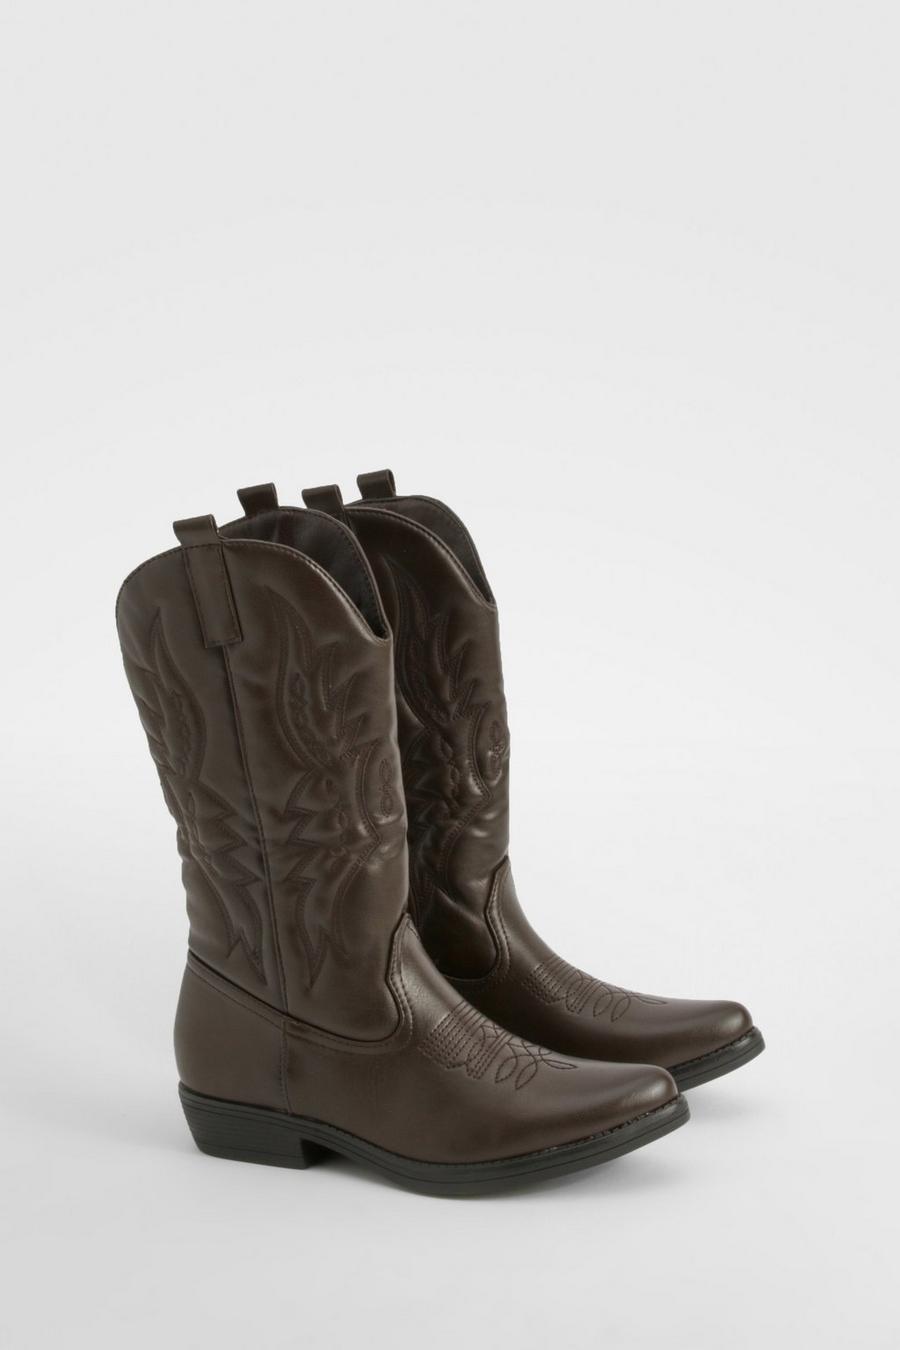 Brown Embroidered Western Cowboy Boots     